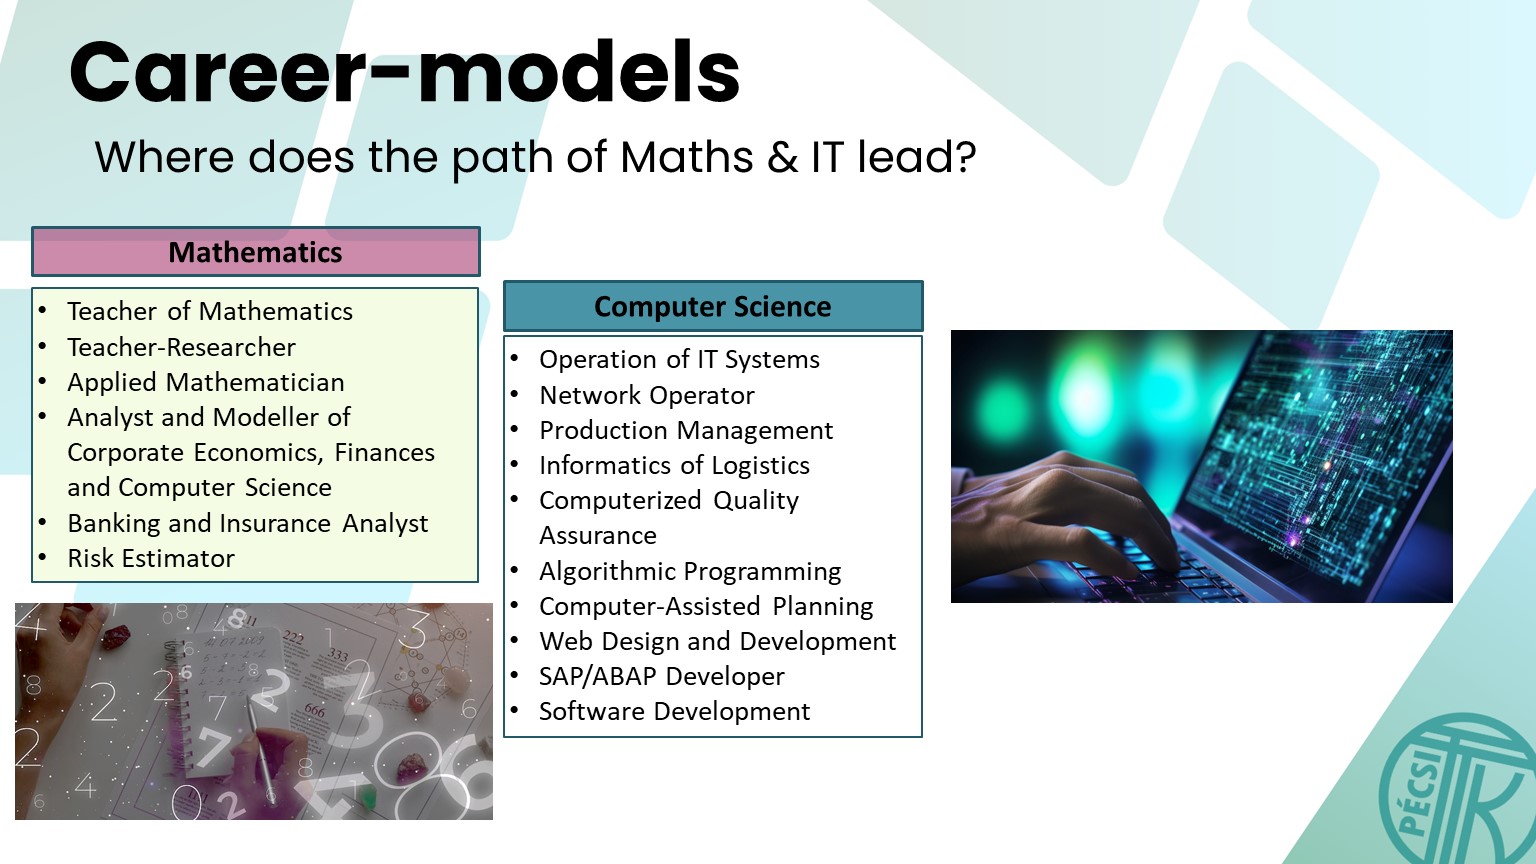 Career-models for Maths+IT applicants